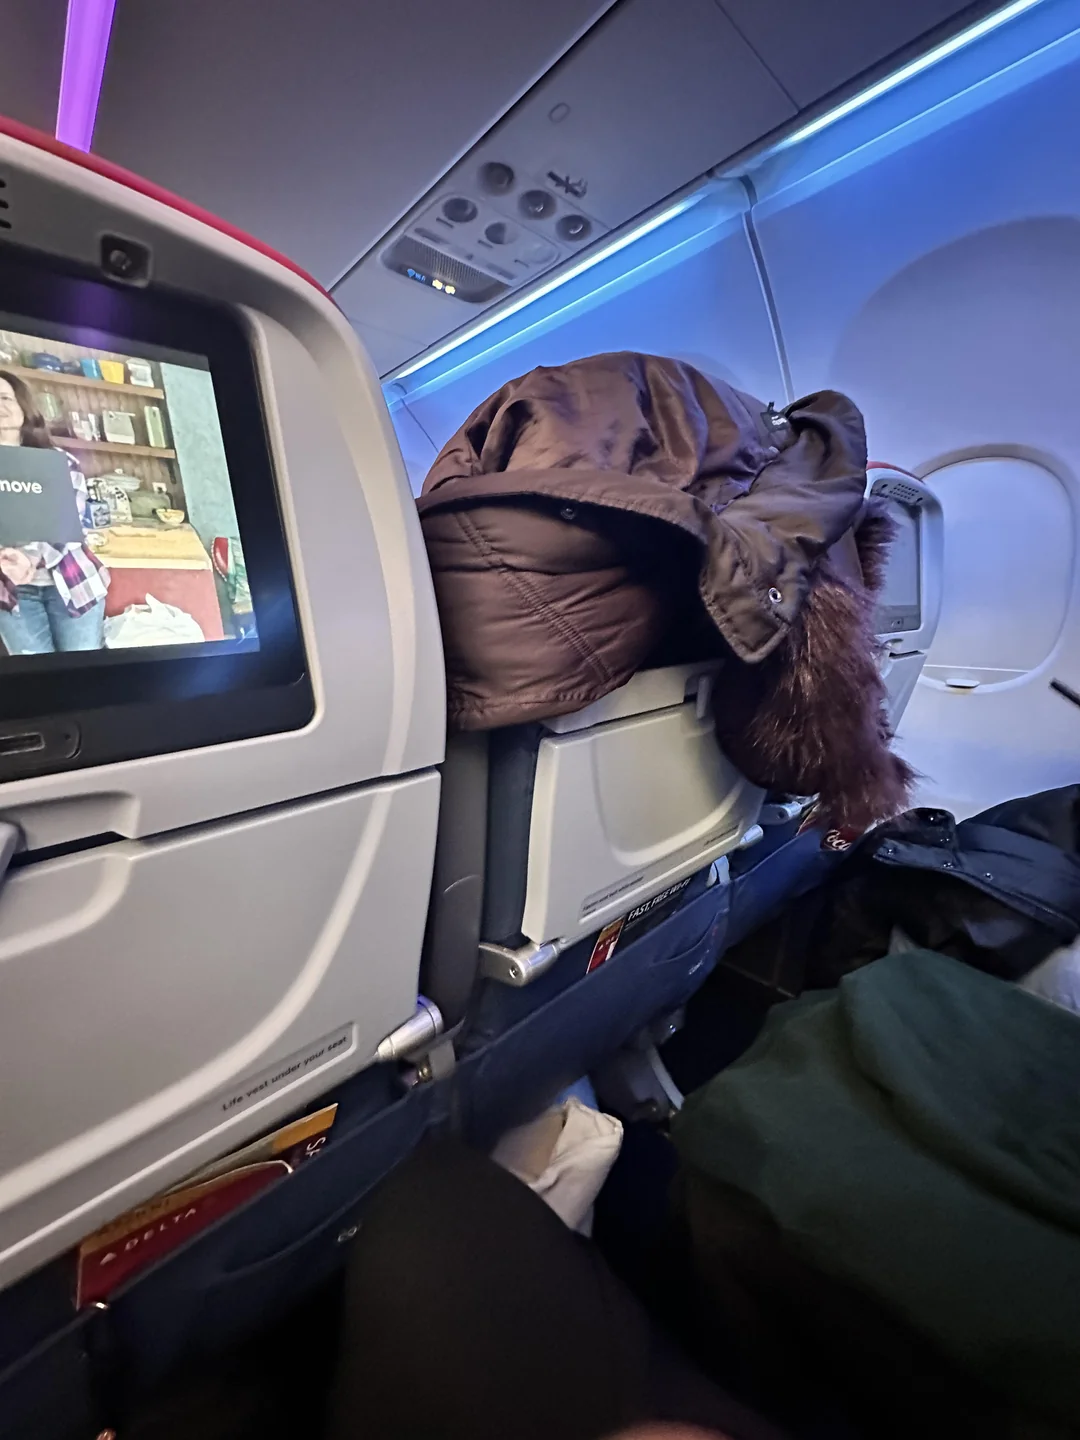 A Whole New Way To Be Awful At 30,000 Feet As Passenger’s Clever Hack Ruins Neighbor’s Flight Experience